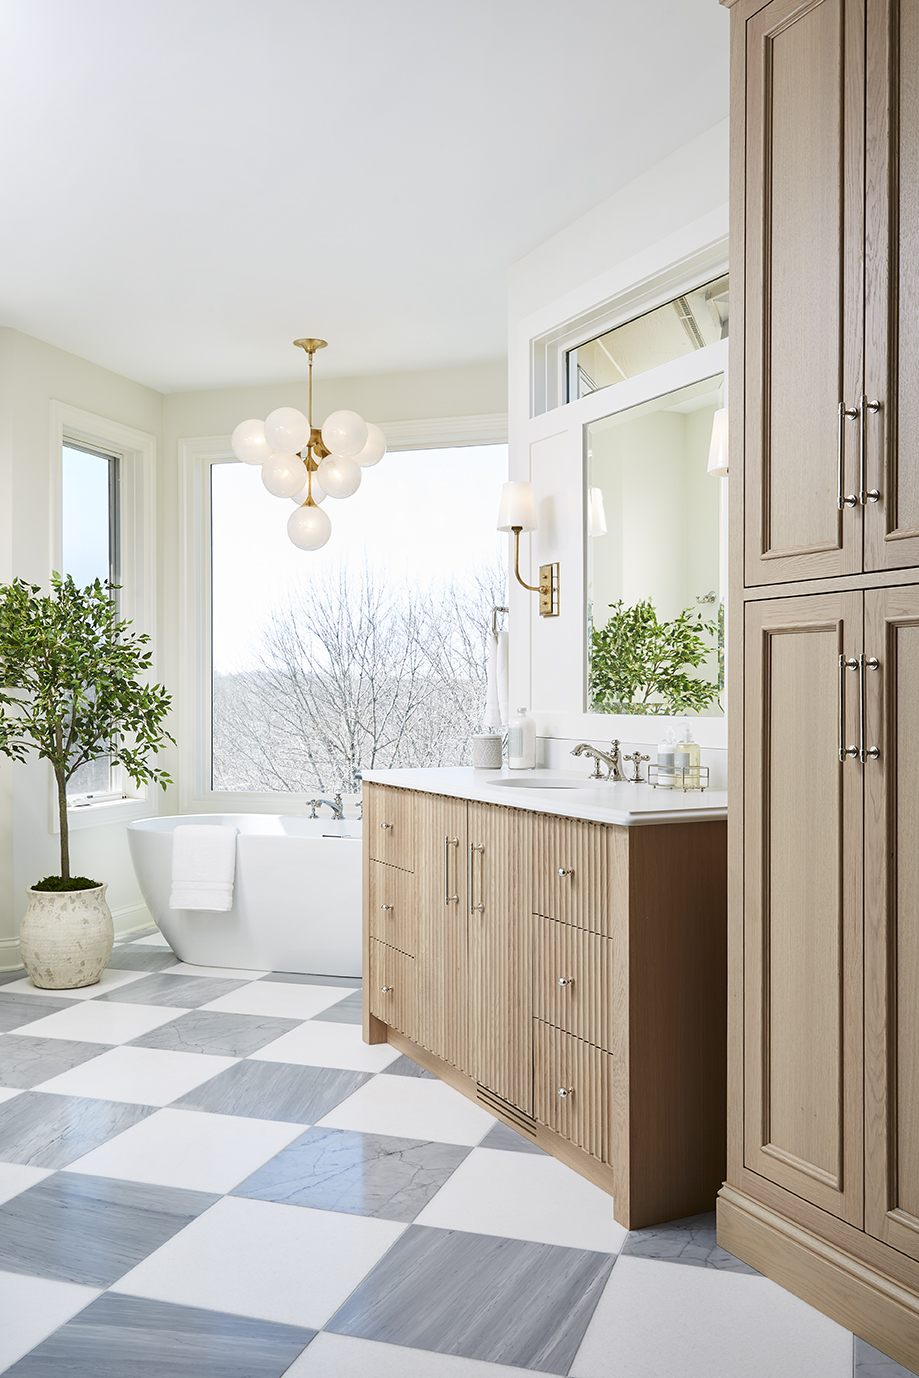 Master bathroom with checkered tile floors, a white standing soaker tub, a chandelier over the tub, and an oak wood vanity